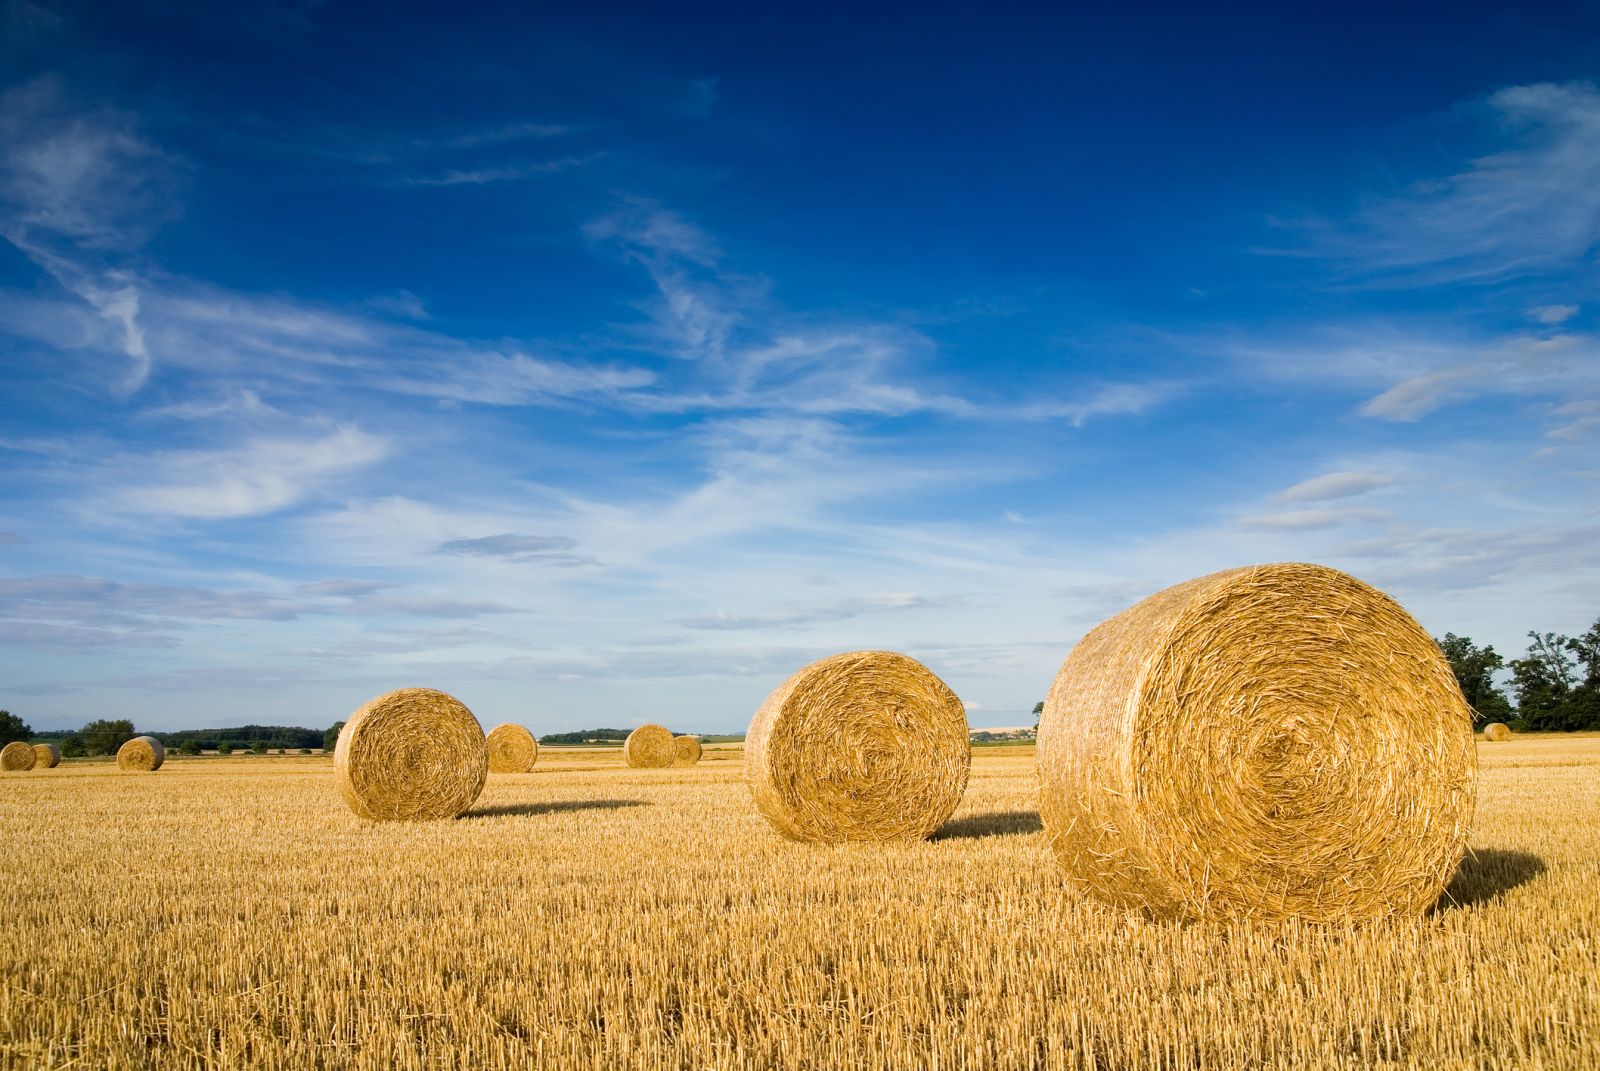 Farming - late summer landscape with straw bales in field by dusipuffi via iStock